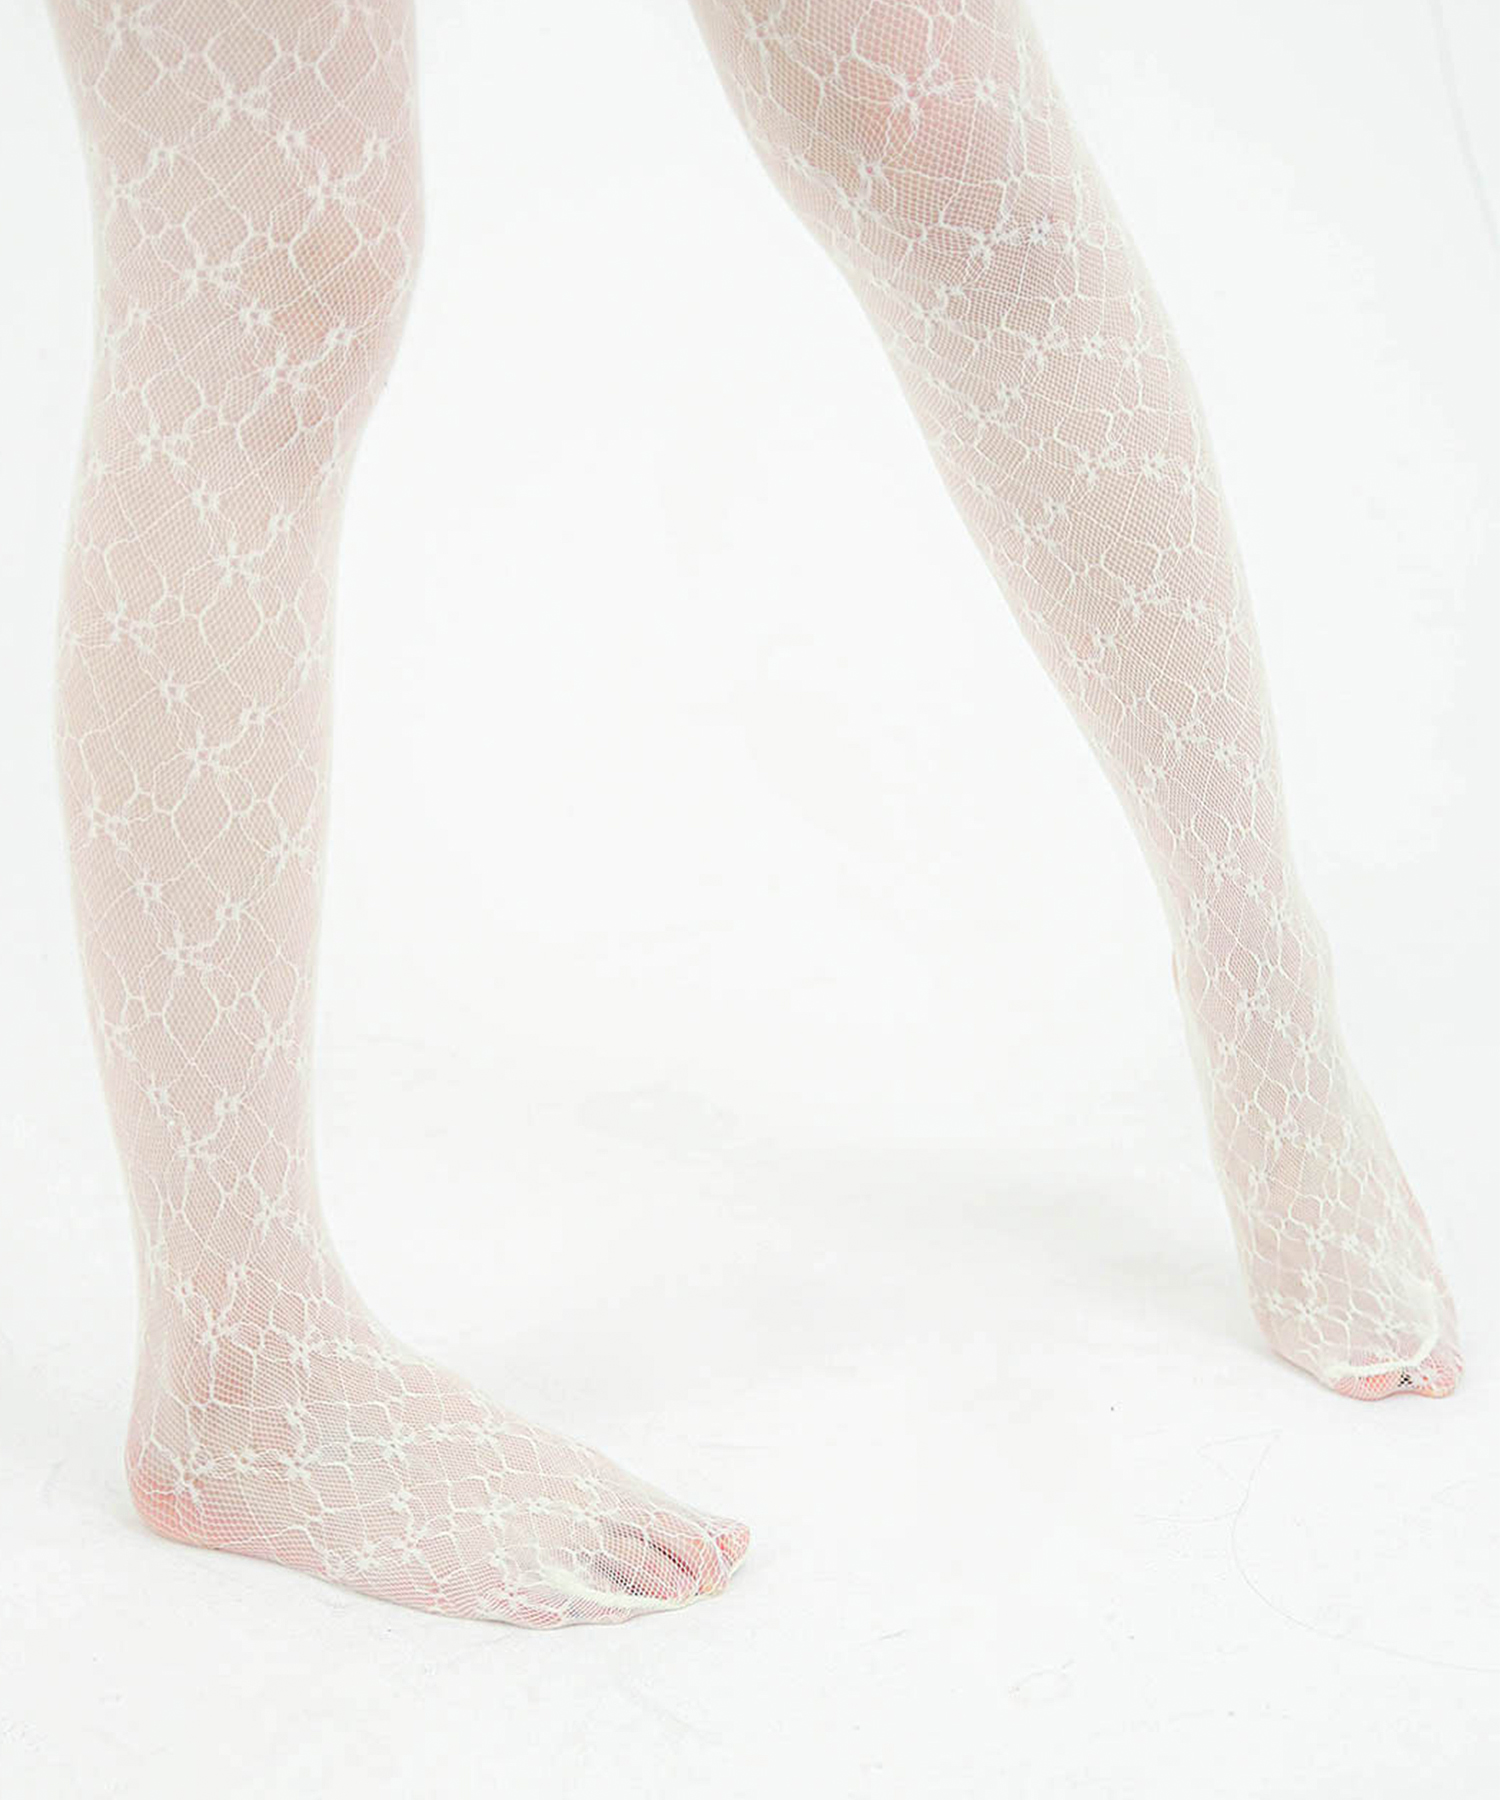 60521 Footed See-Through Stockings